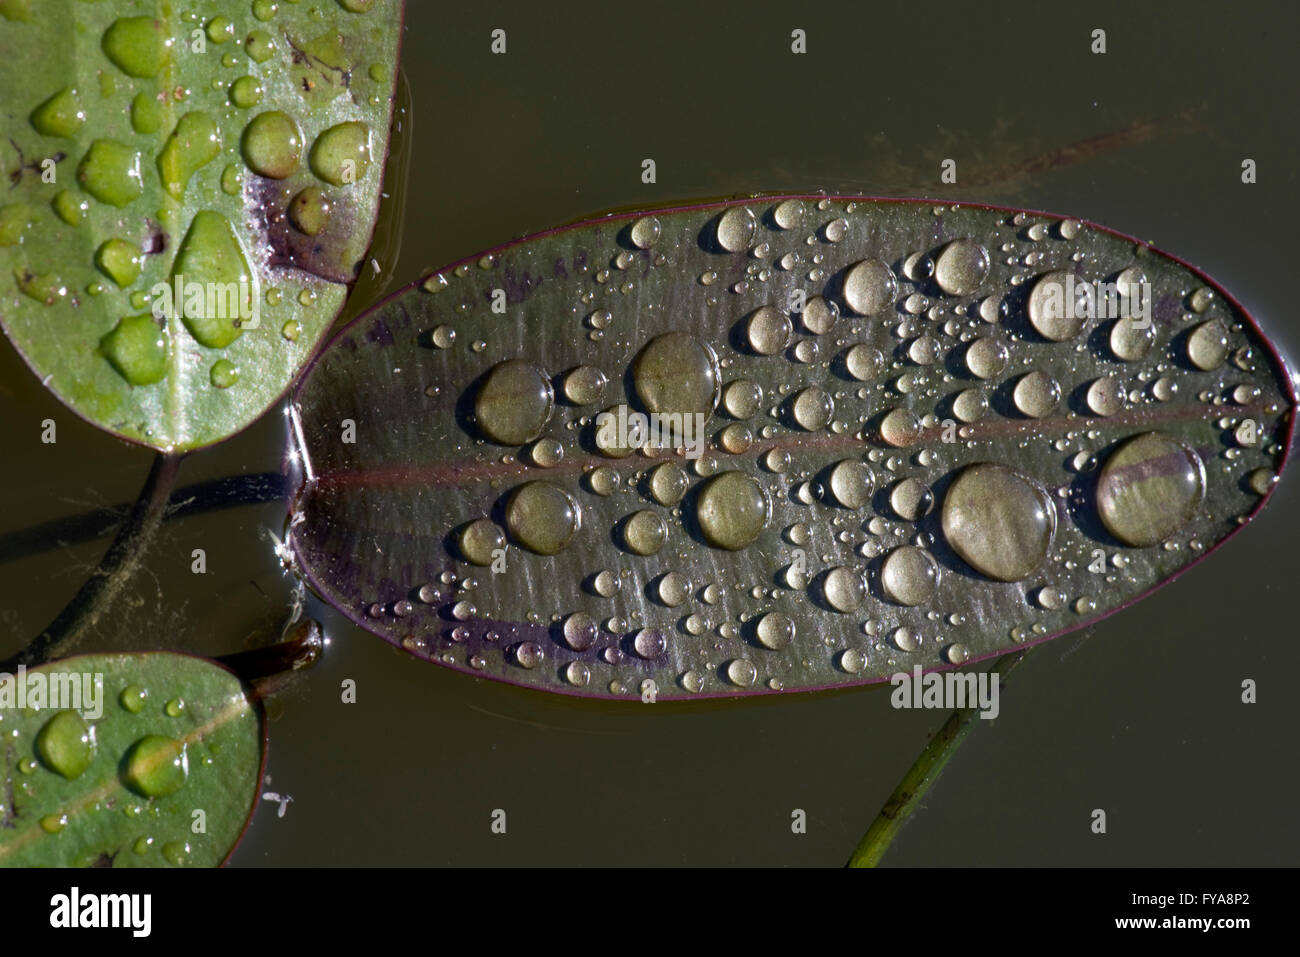 Rain water droplets on the leaf of water hawthorn or Aponogeton distachyos on a pond surface Stock Photo